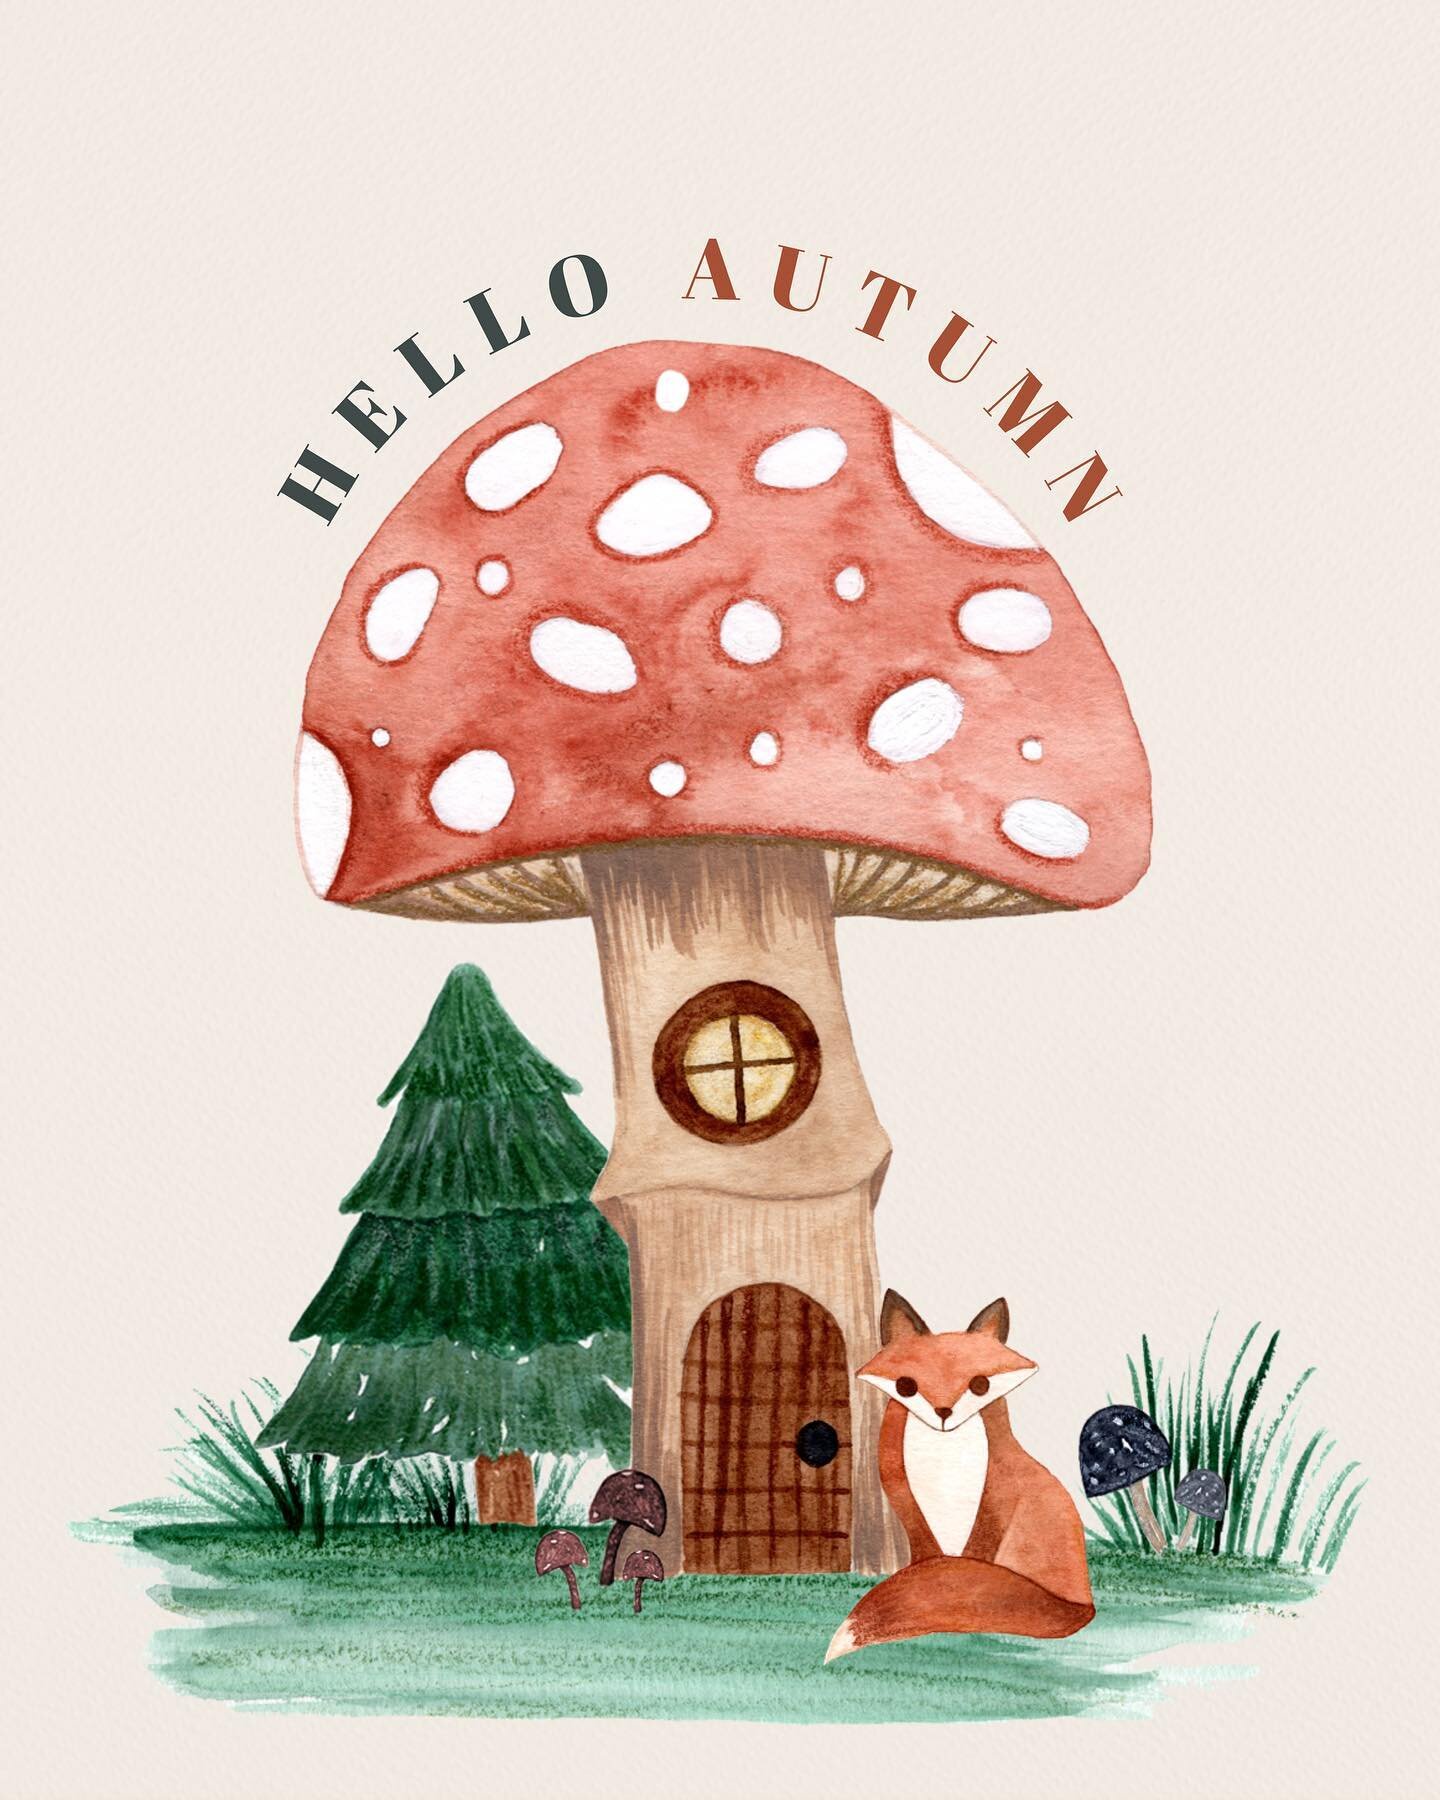 🍂 Hello Autumn, I have been waiting for you for almost a year ✨

#autumnalequinox2023 #helloautumn #hellofall #watercolorart #autumnwatercolorart #fallwatercolorart #woodlandanimals #woodlandwatercolorart #foxwatercolorart #autumn2023 #fall2023